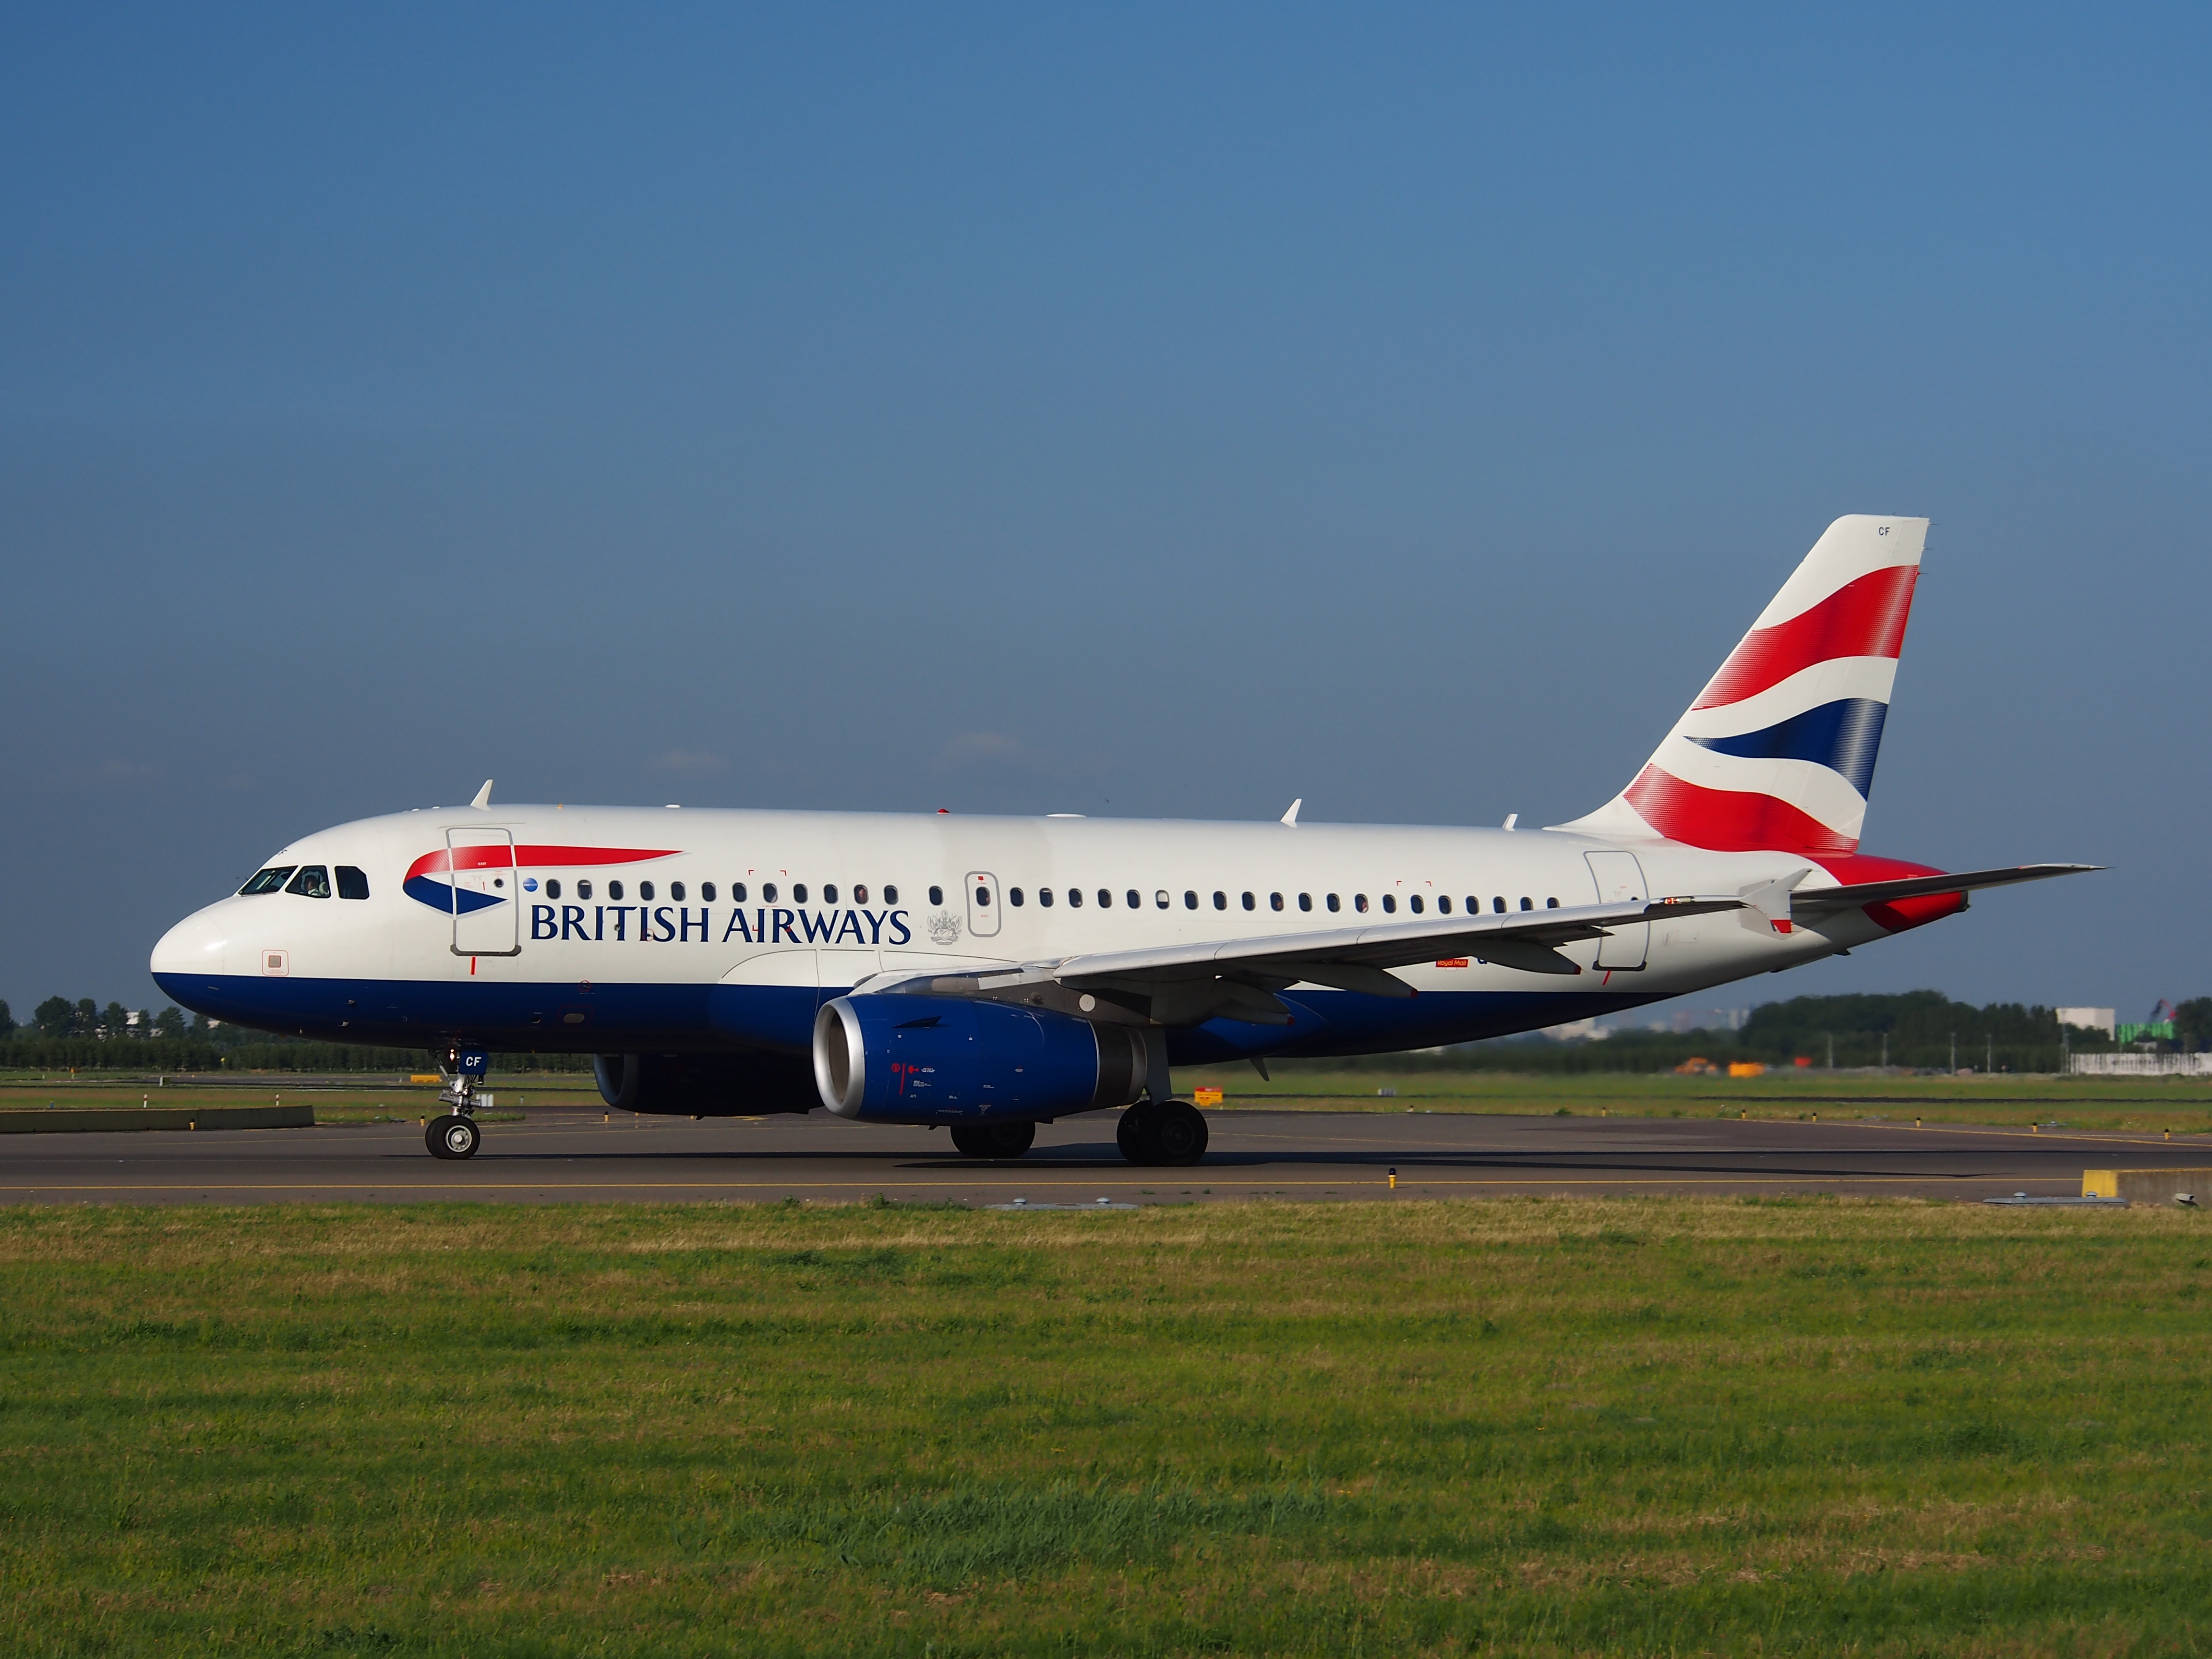 G-DBCF British Airways Airbus A319-131 - cn 2466 taxiing 15july2013 pic-004